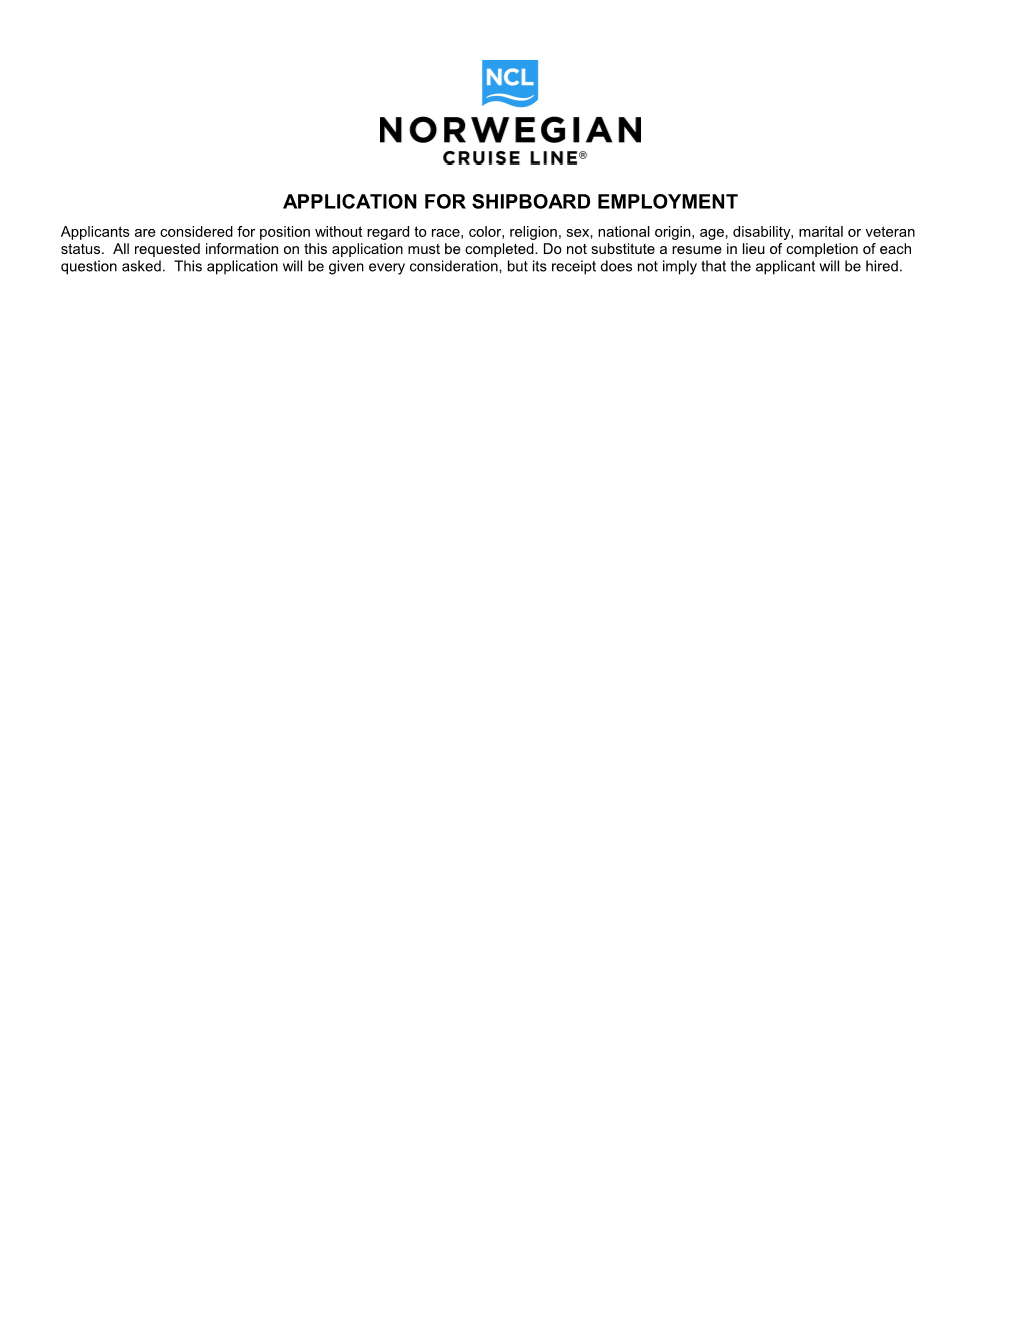 Application for Employment s25